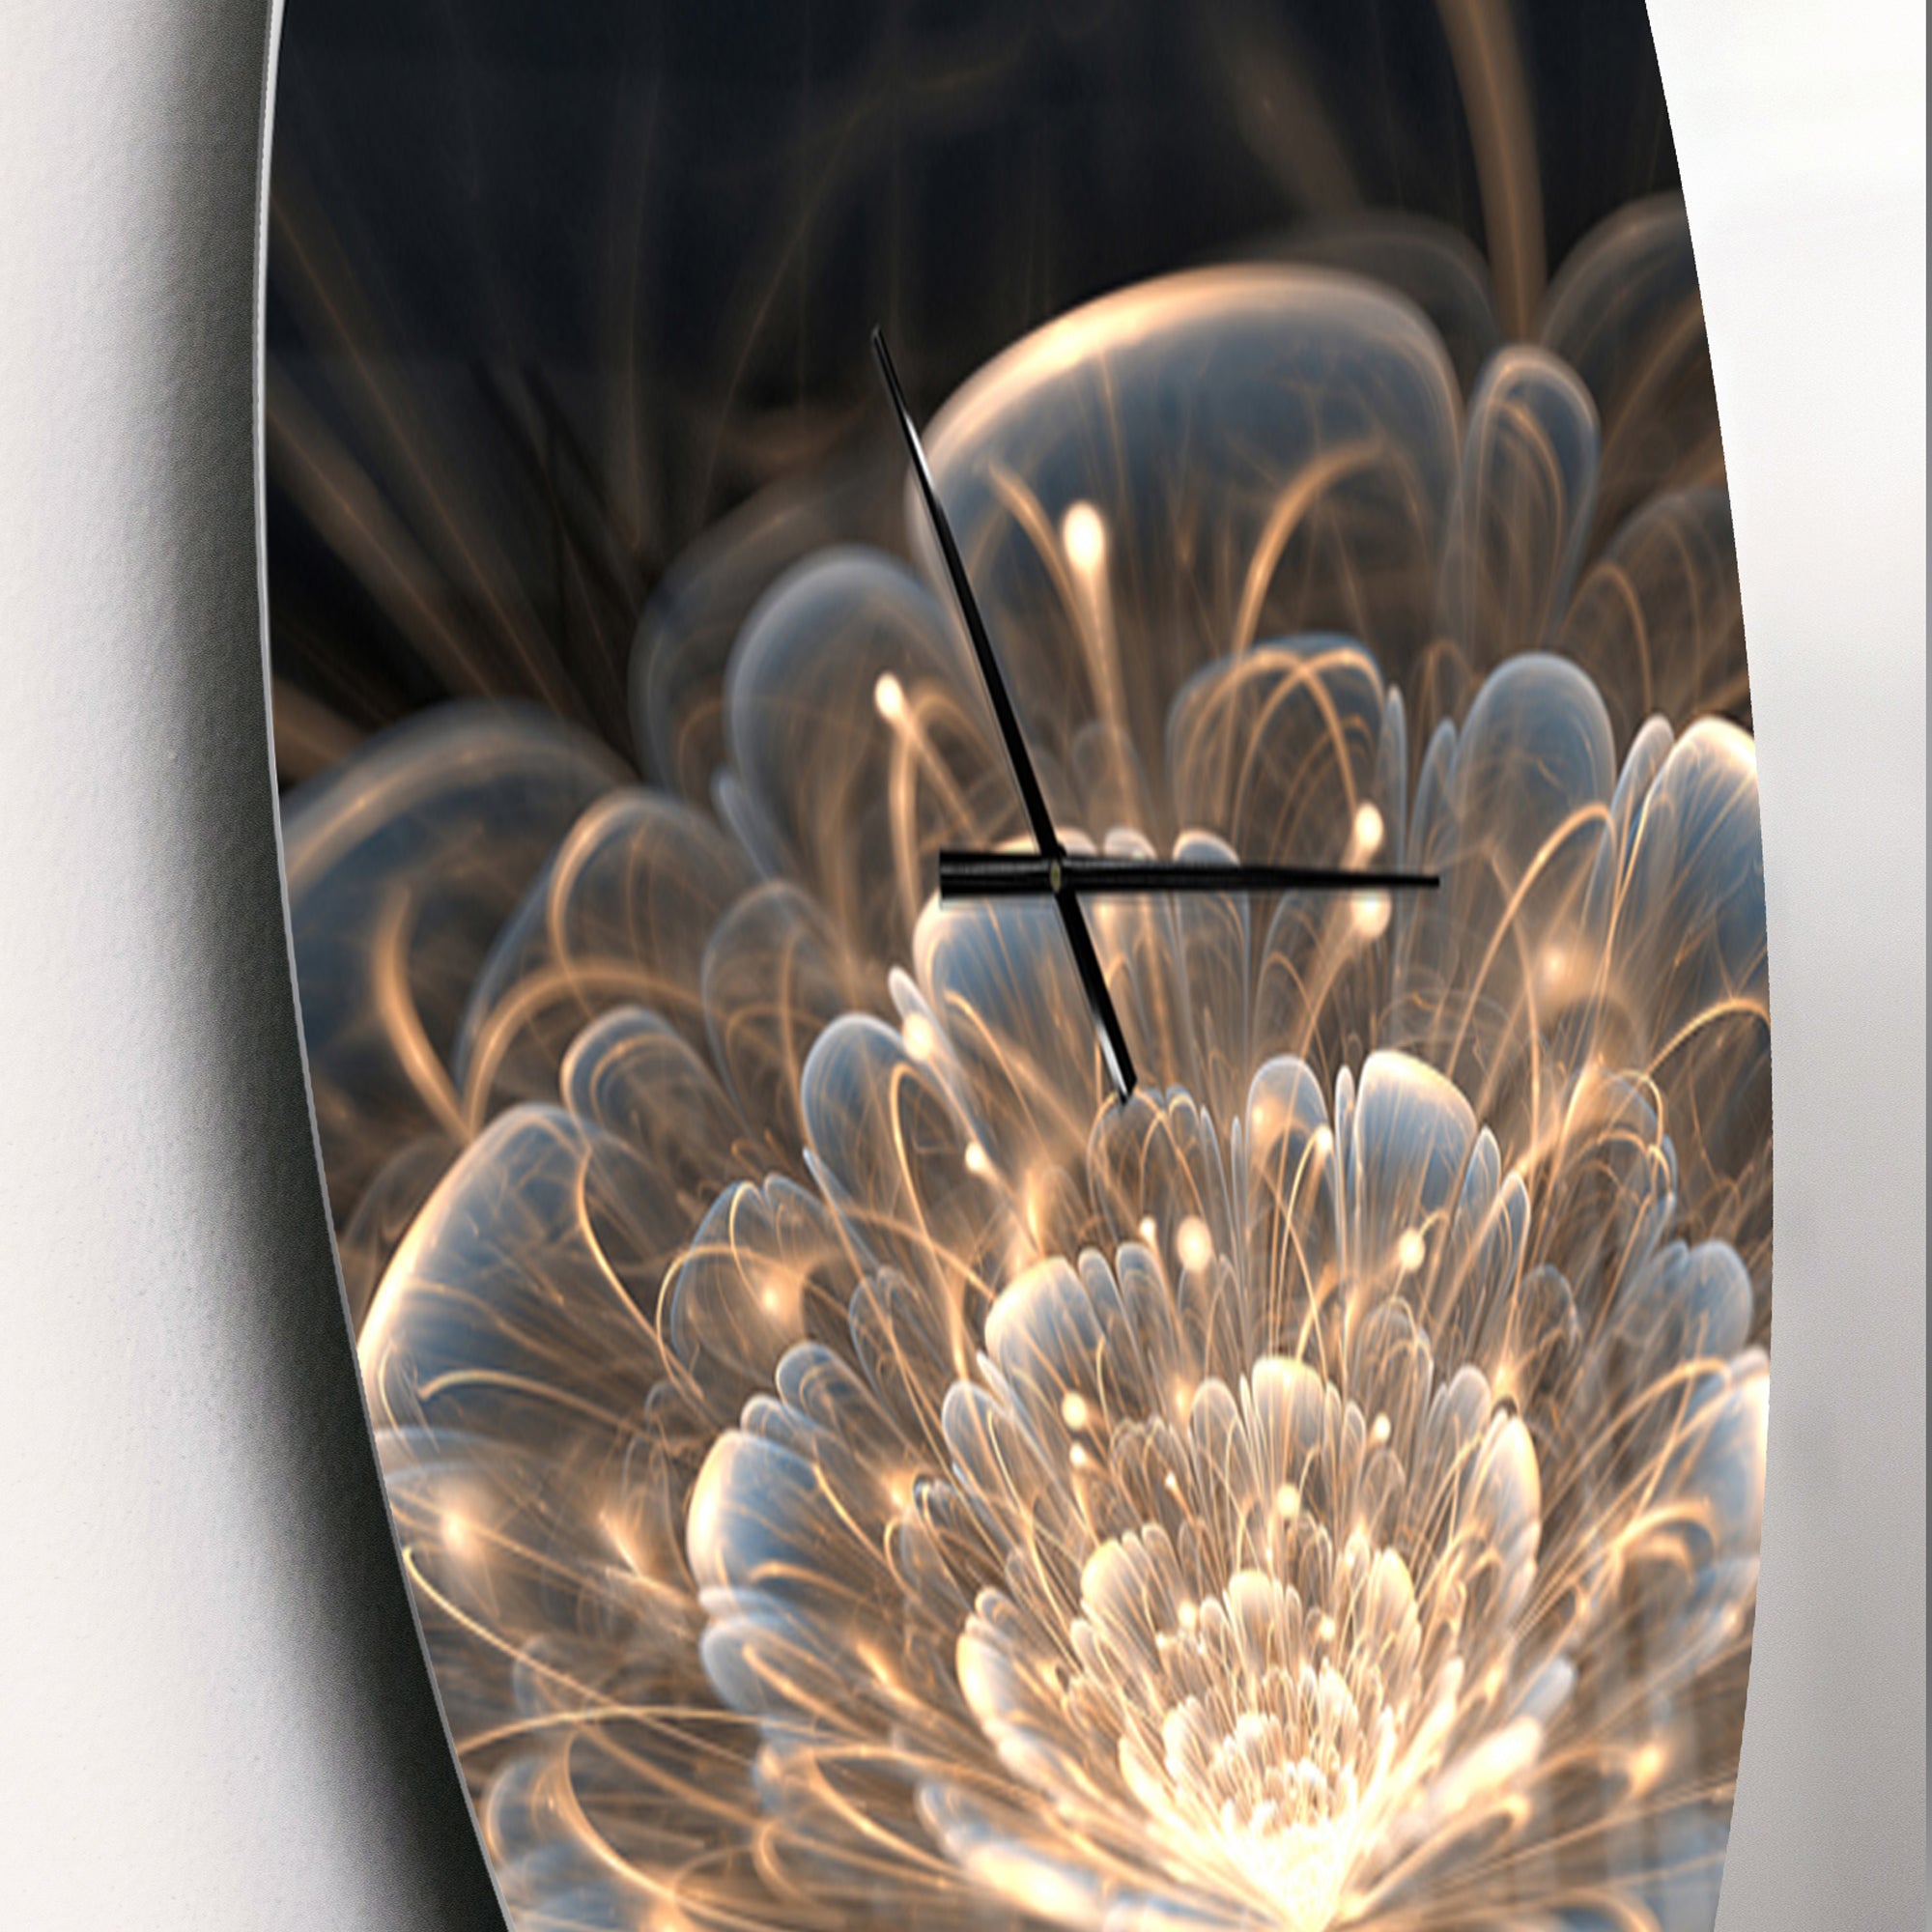 Fractal Flower with Golden Rays